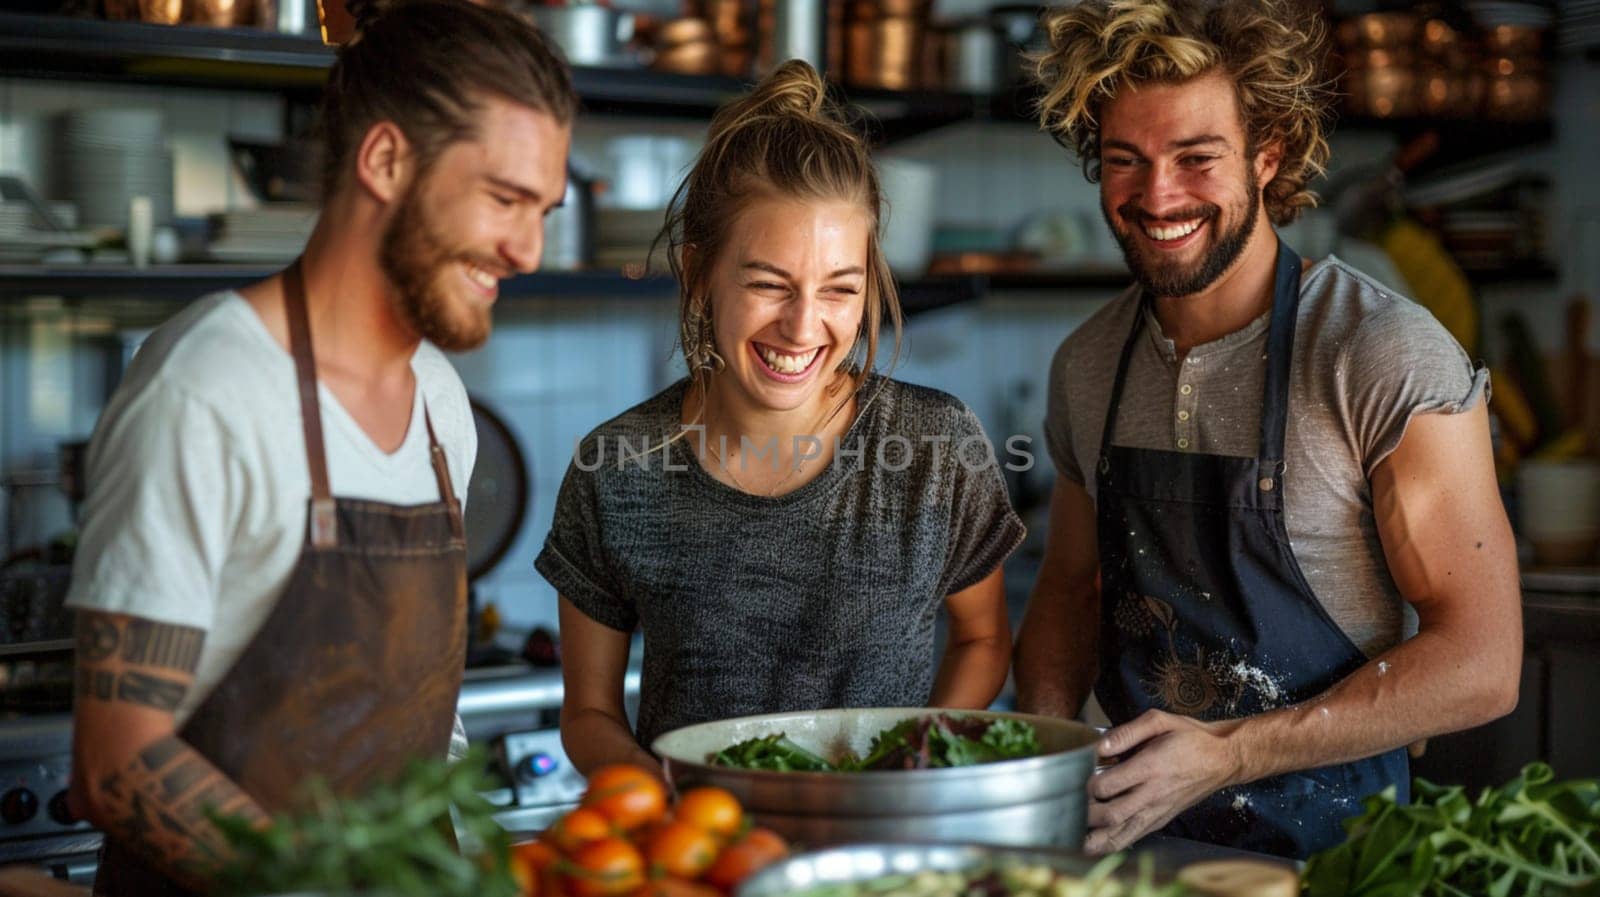 Three people are smiling and laughing while preparing food in a kitchen. The kitchen is filled with various plants and fruits, including oranges and green vegetables. The atmosphere is cheerful AI generated